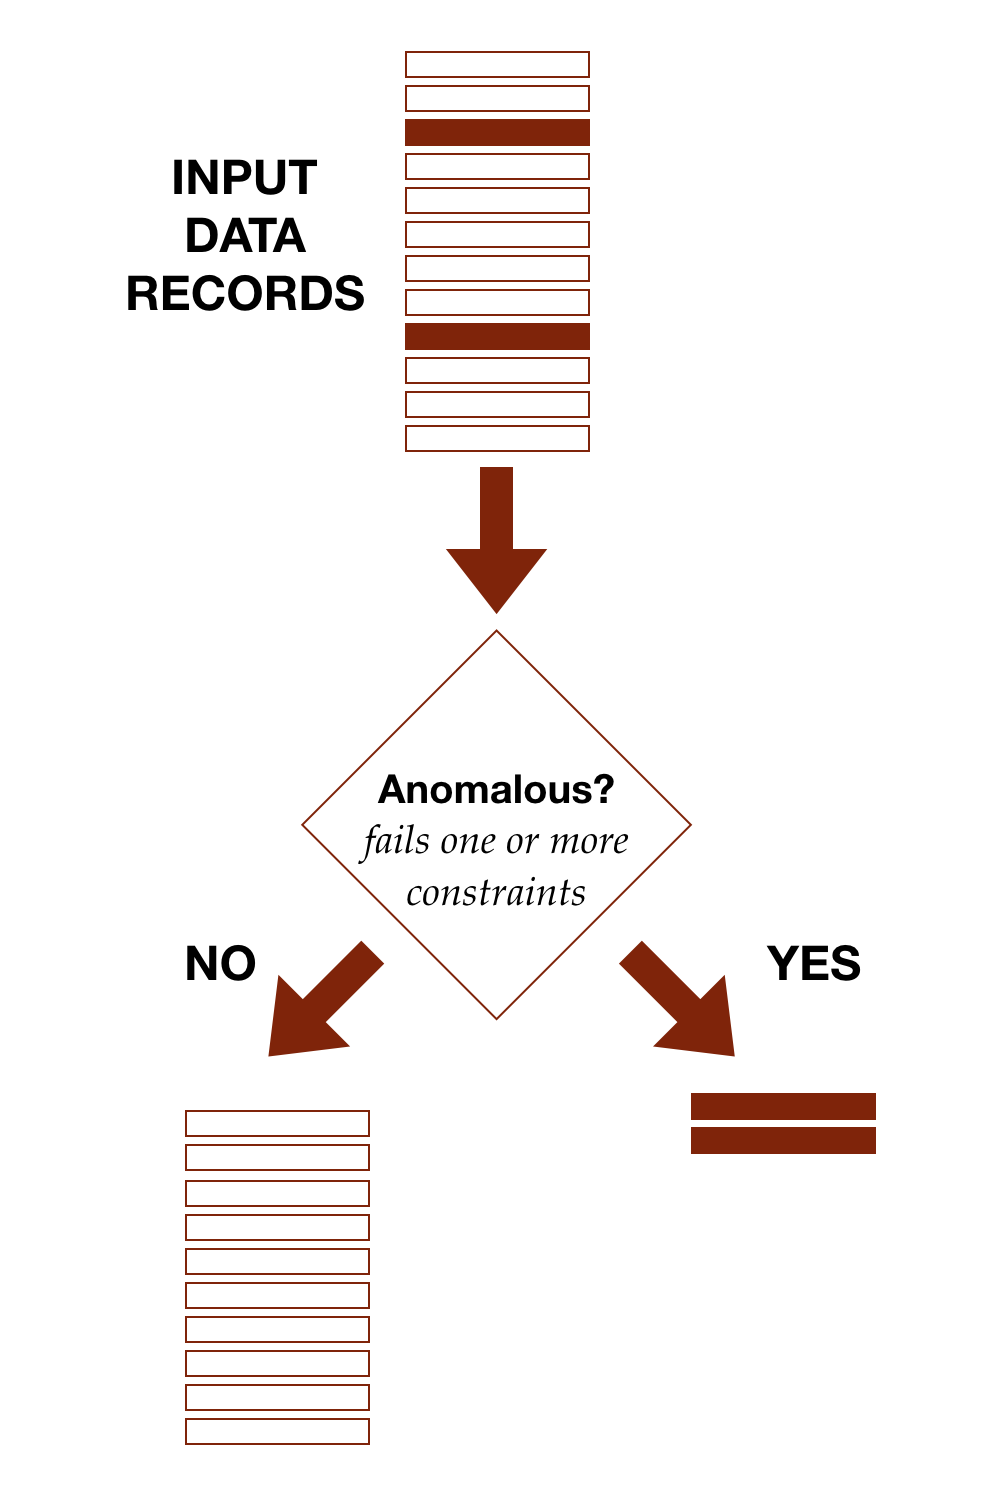 A simple anomaly detection process, splitting input data into anomalous and non-anomalous records